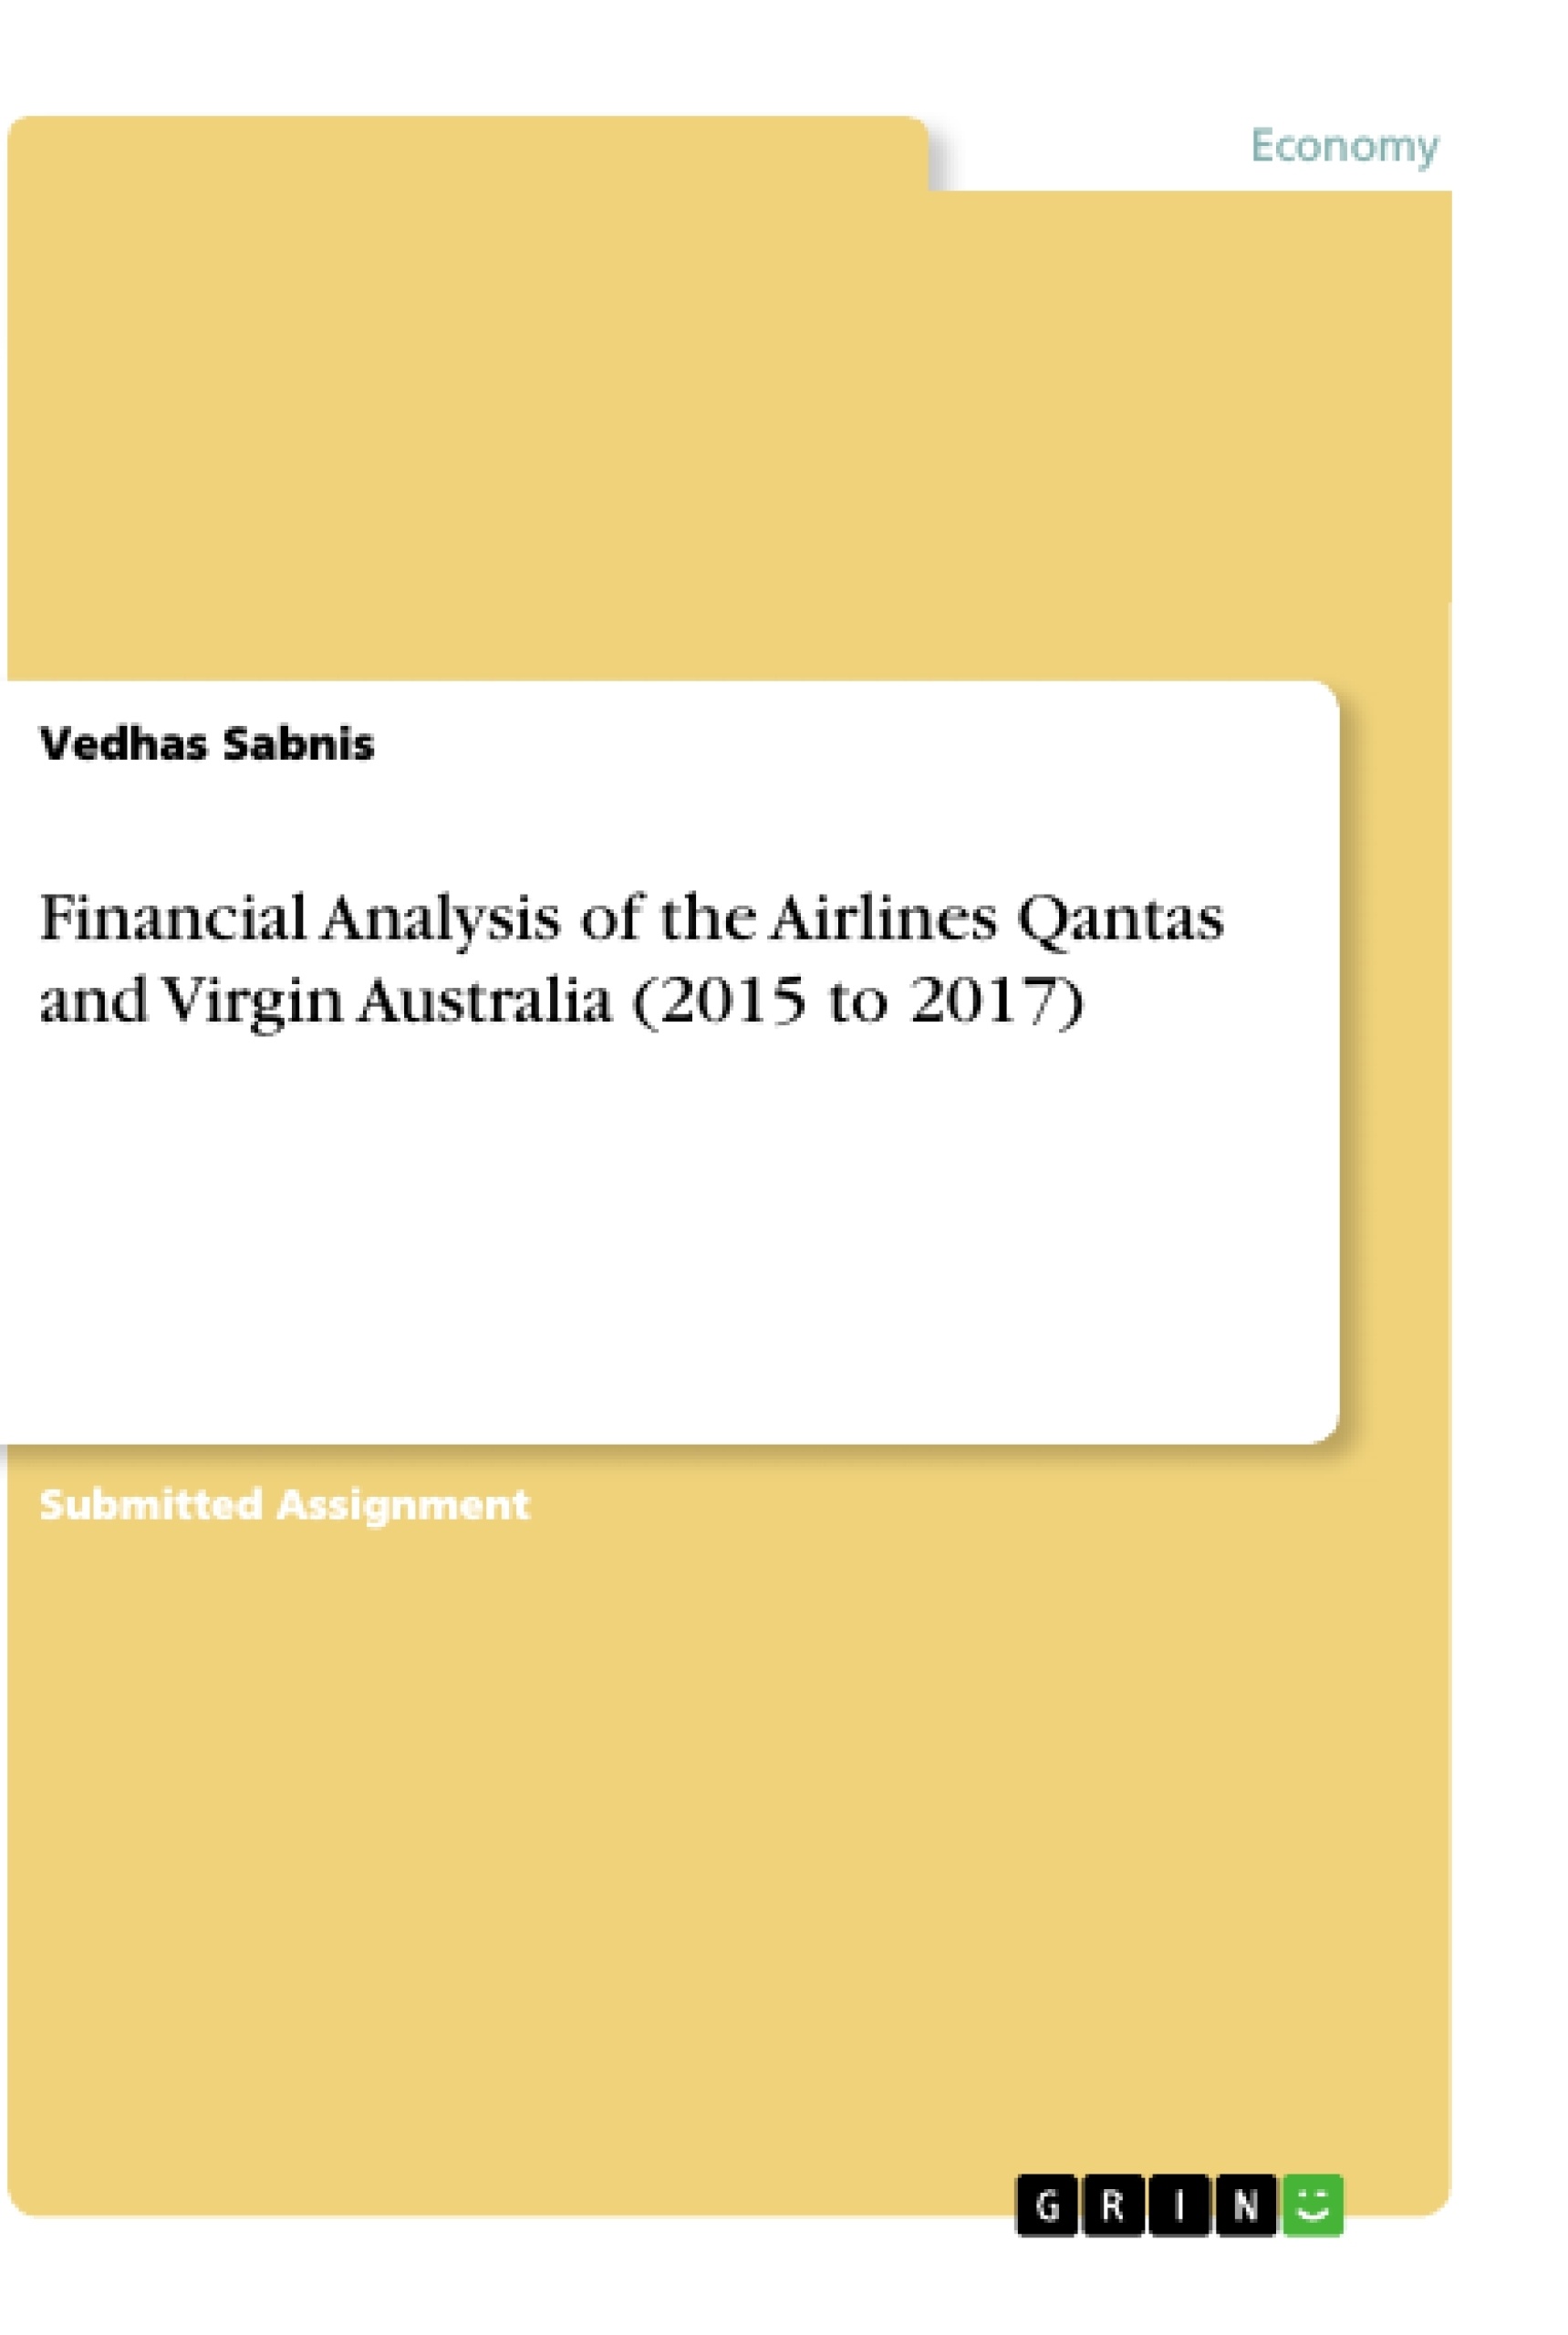 Title: Financial Analysis of the Airlines Qantas and Virgin Australia (2015 to 2017)